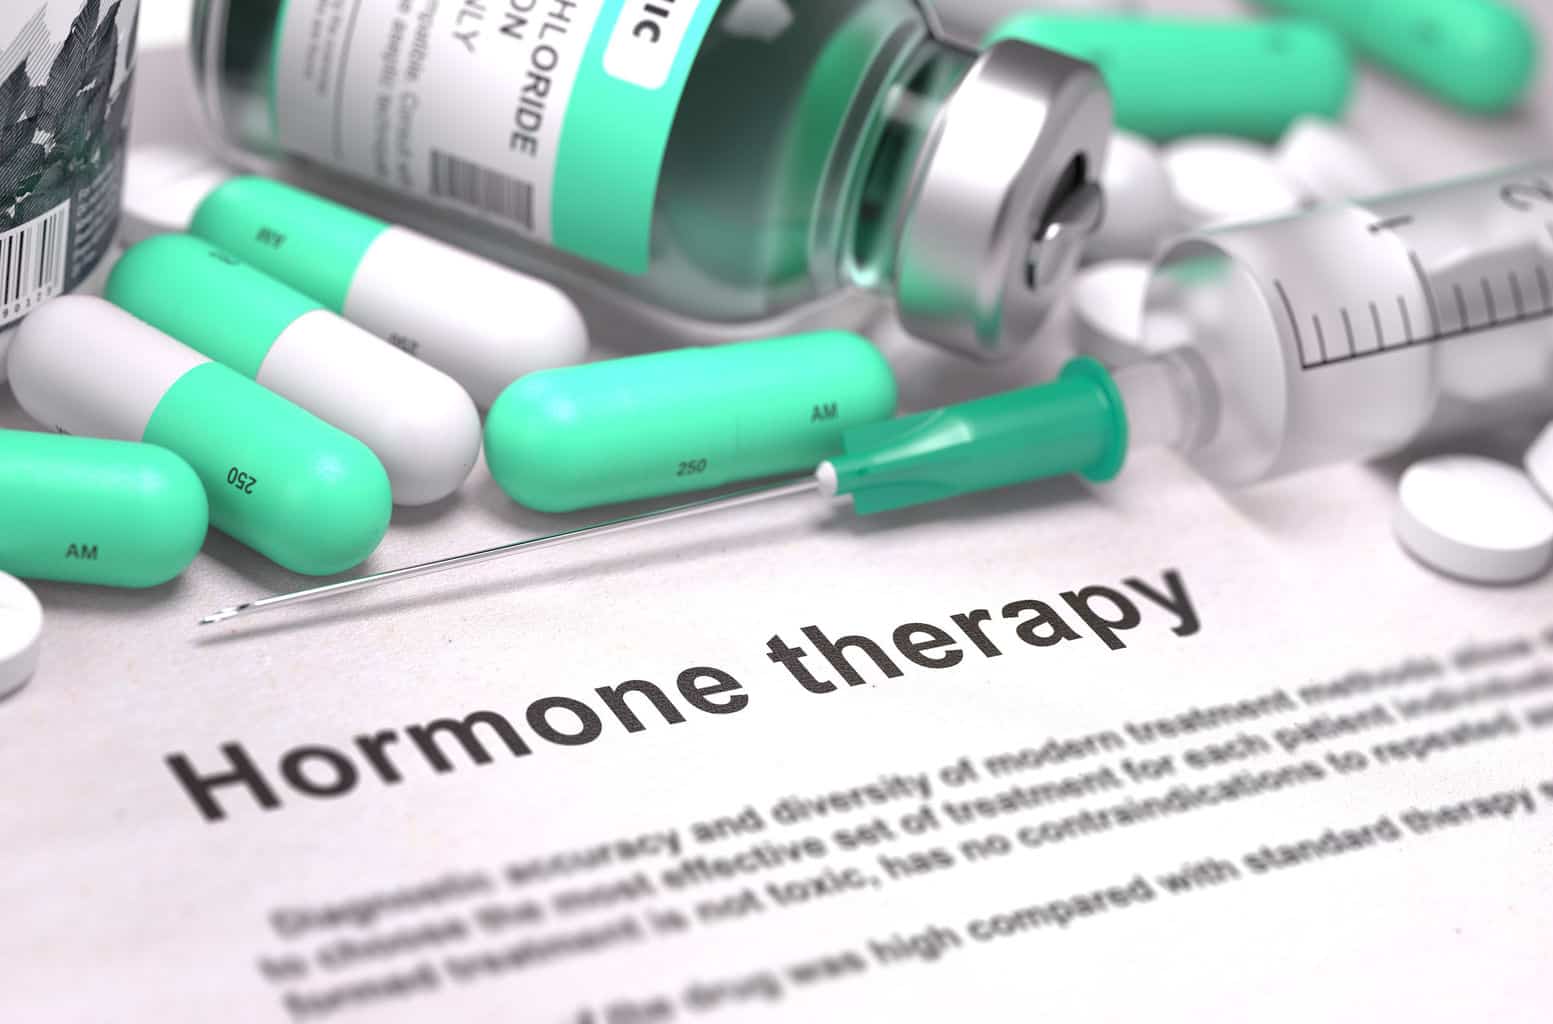 Hormone therapy for prostate cancer